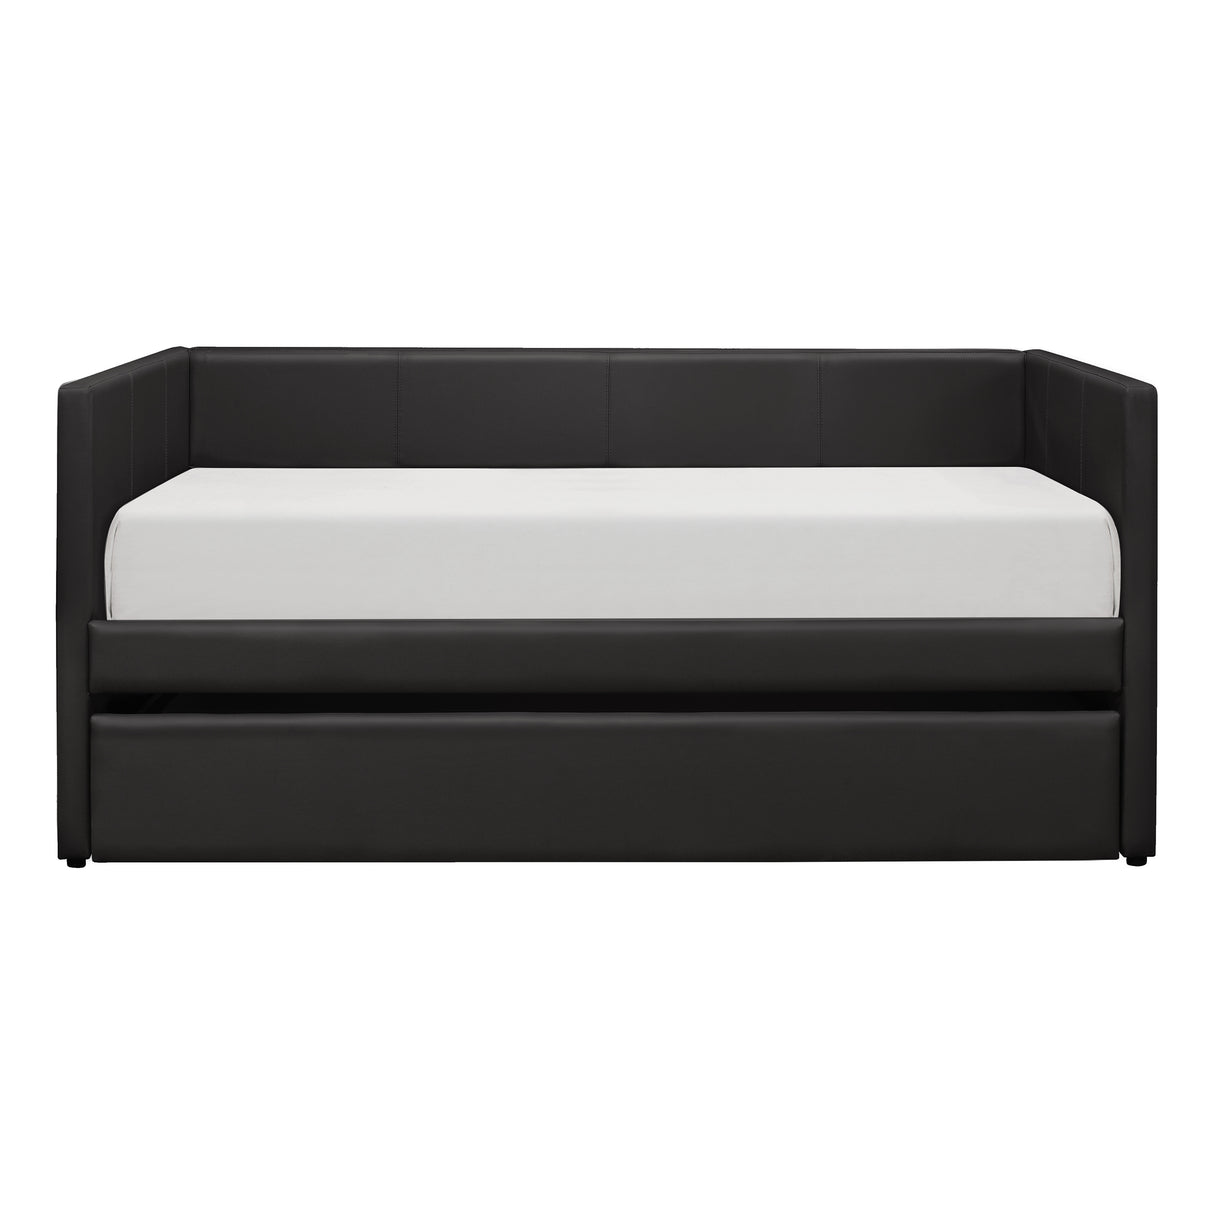 Adra Black Daybed With Trundle